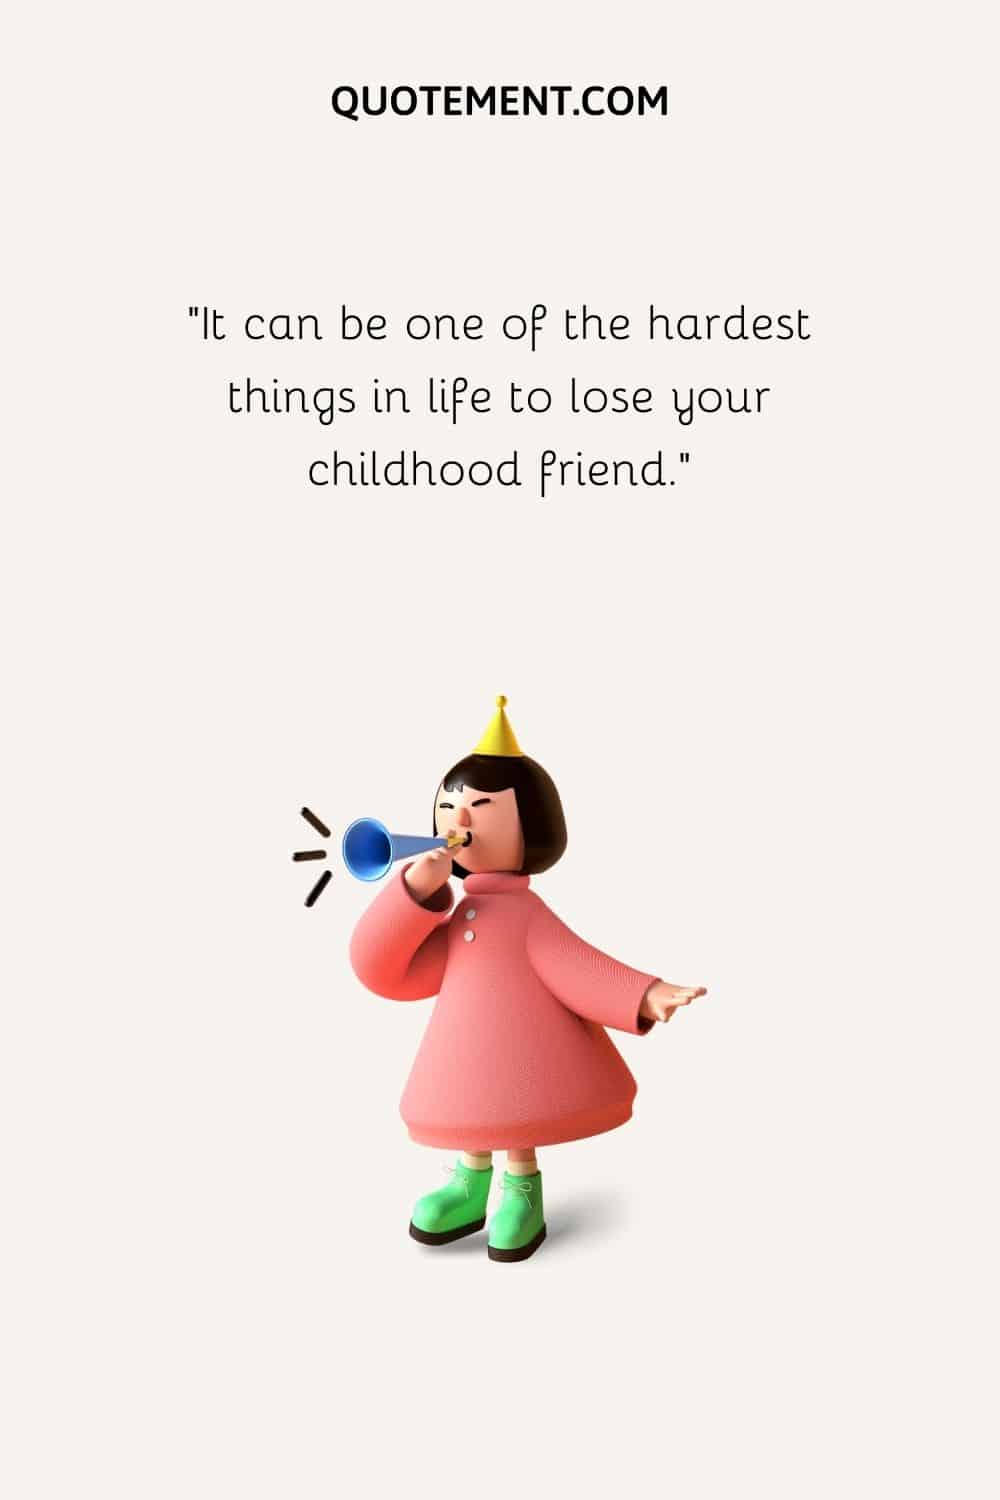 It can be one of the hardest things in life to lose your childhood friend